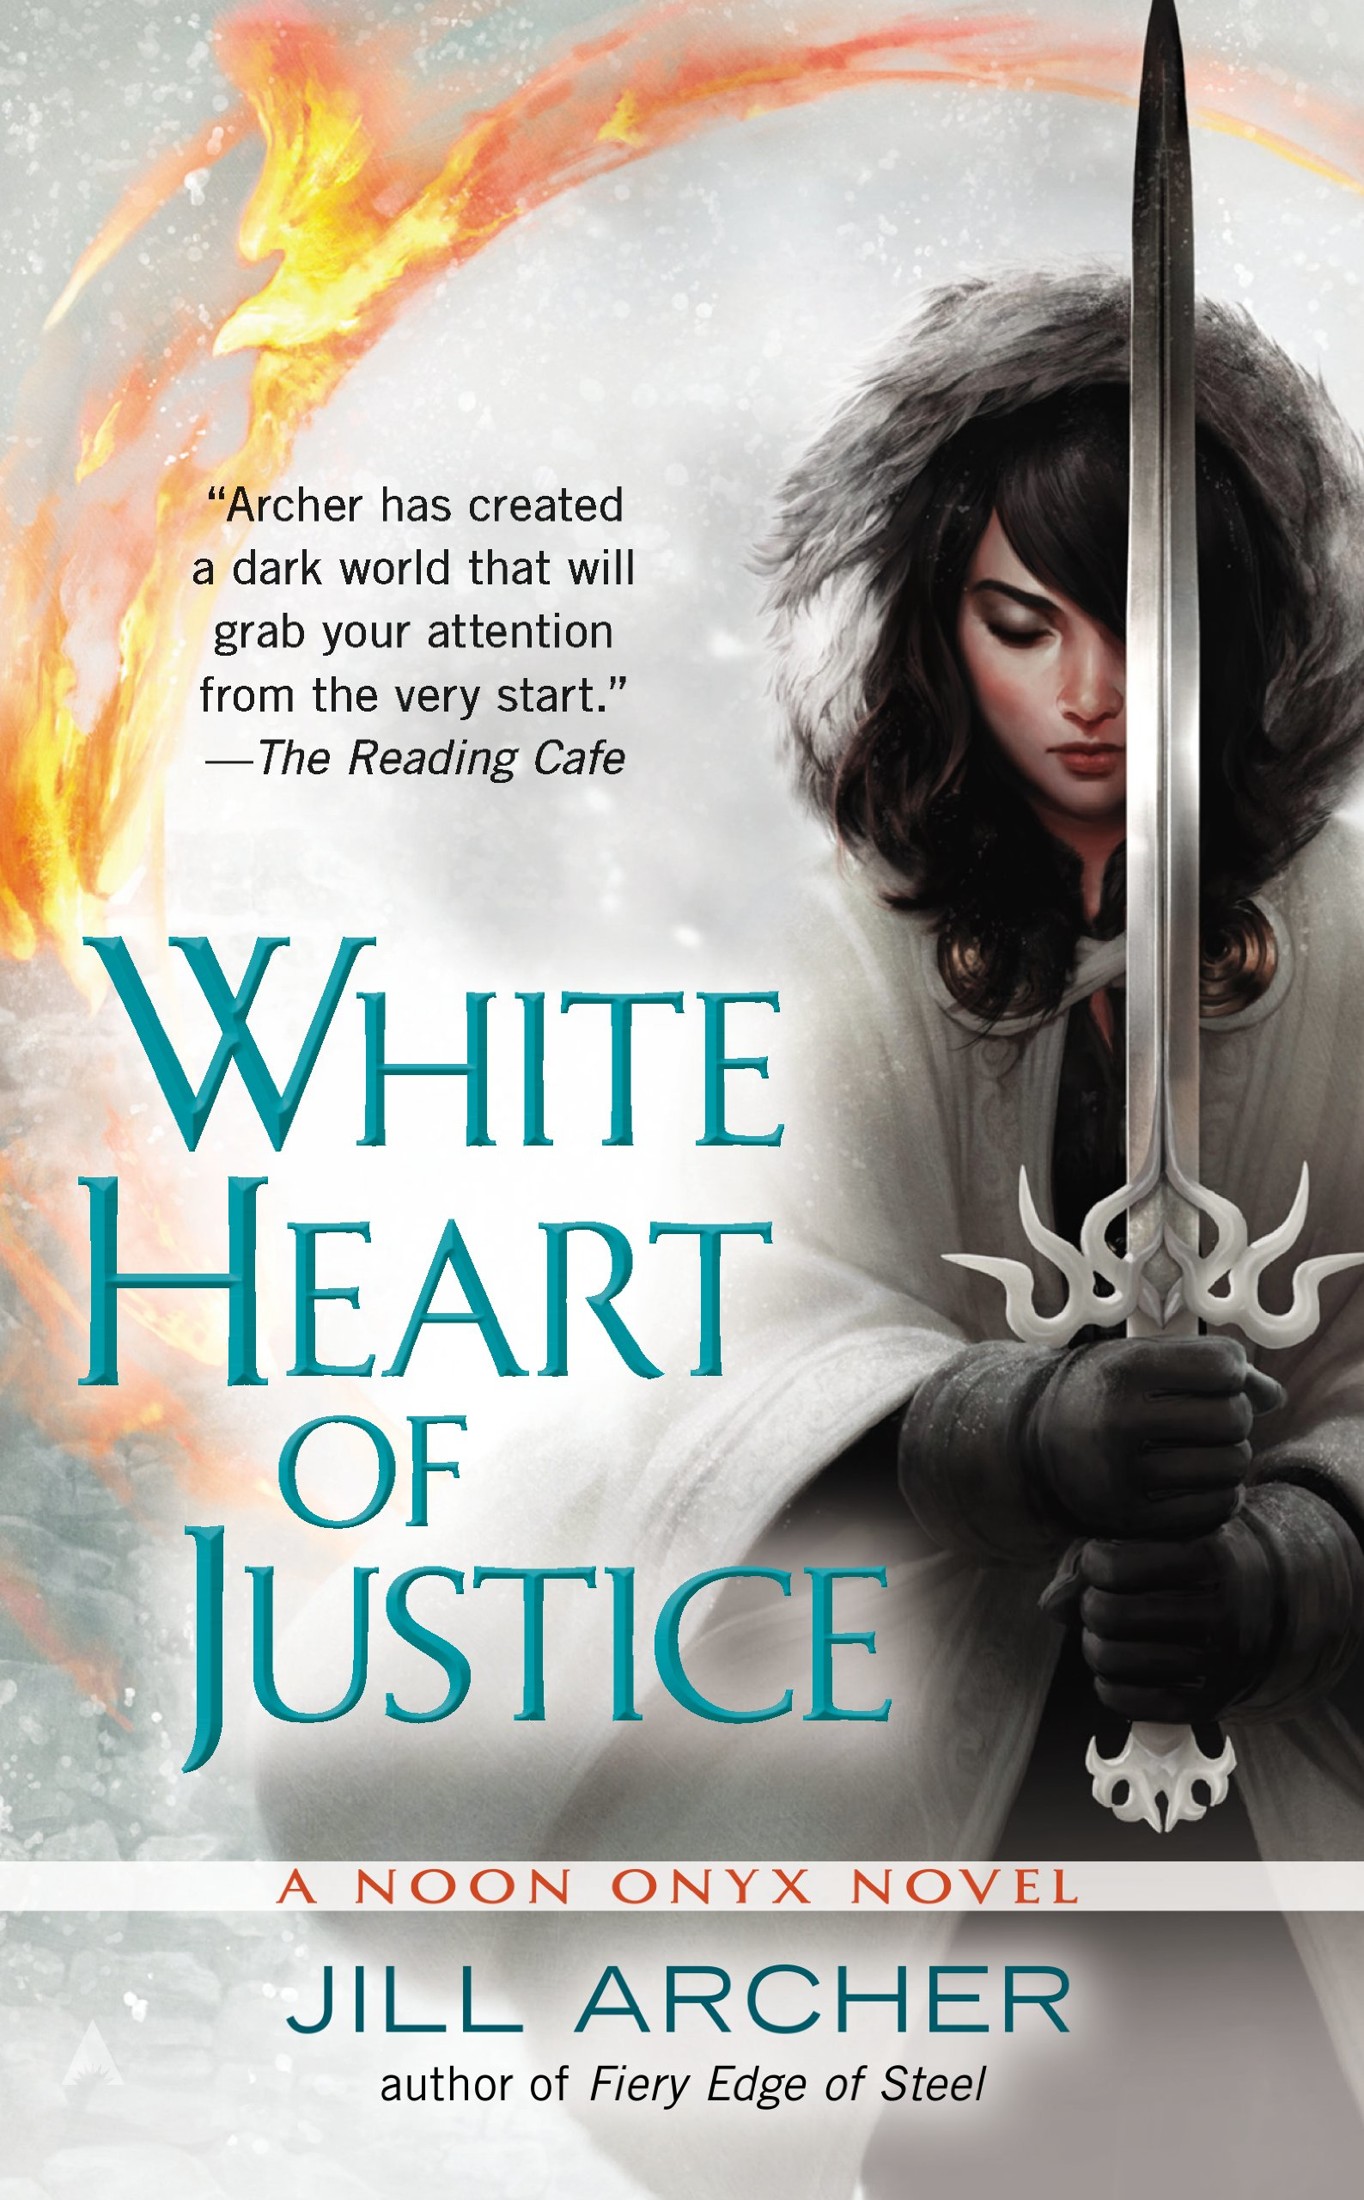 White Heart of Justice (A Noon Onyx Novel)